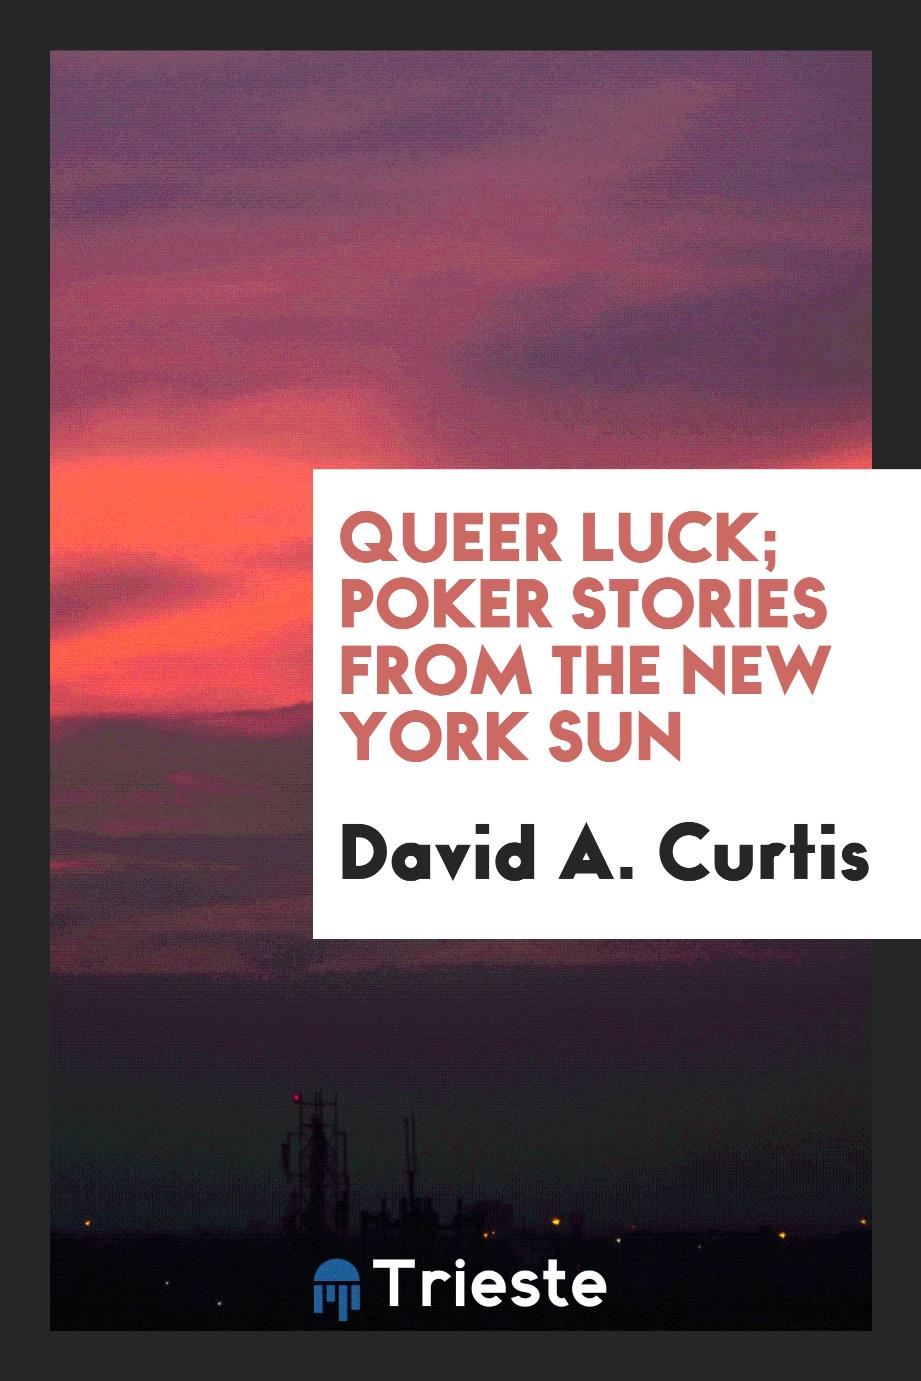 Queer luck; poker stories from the New York sun